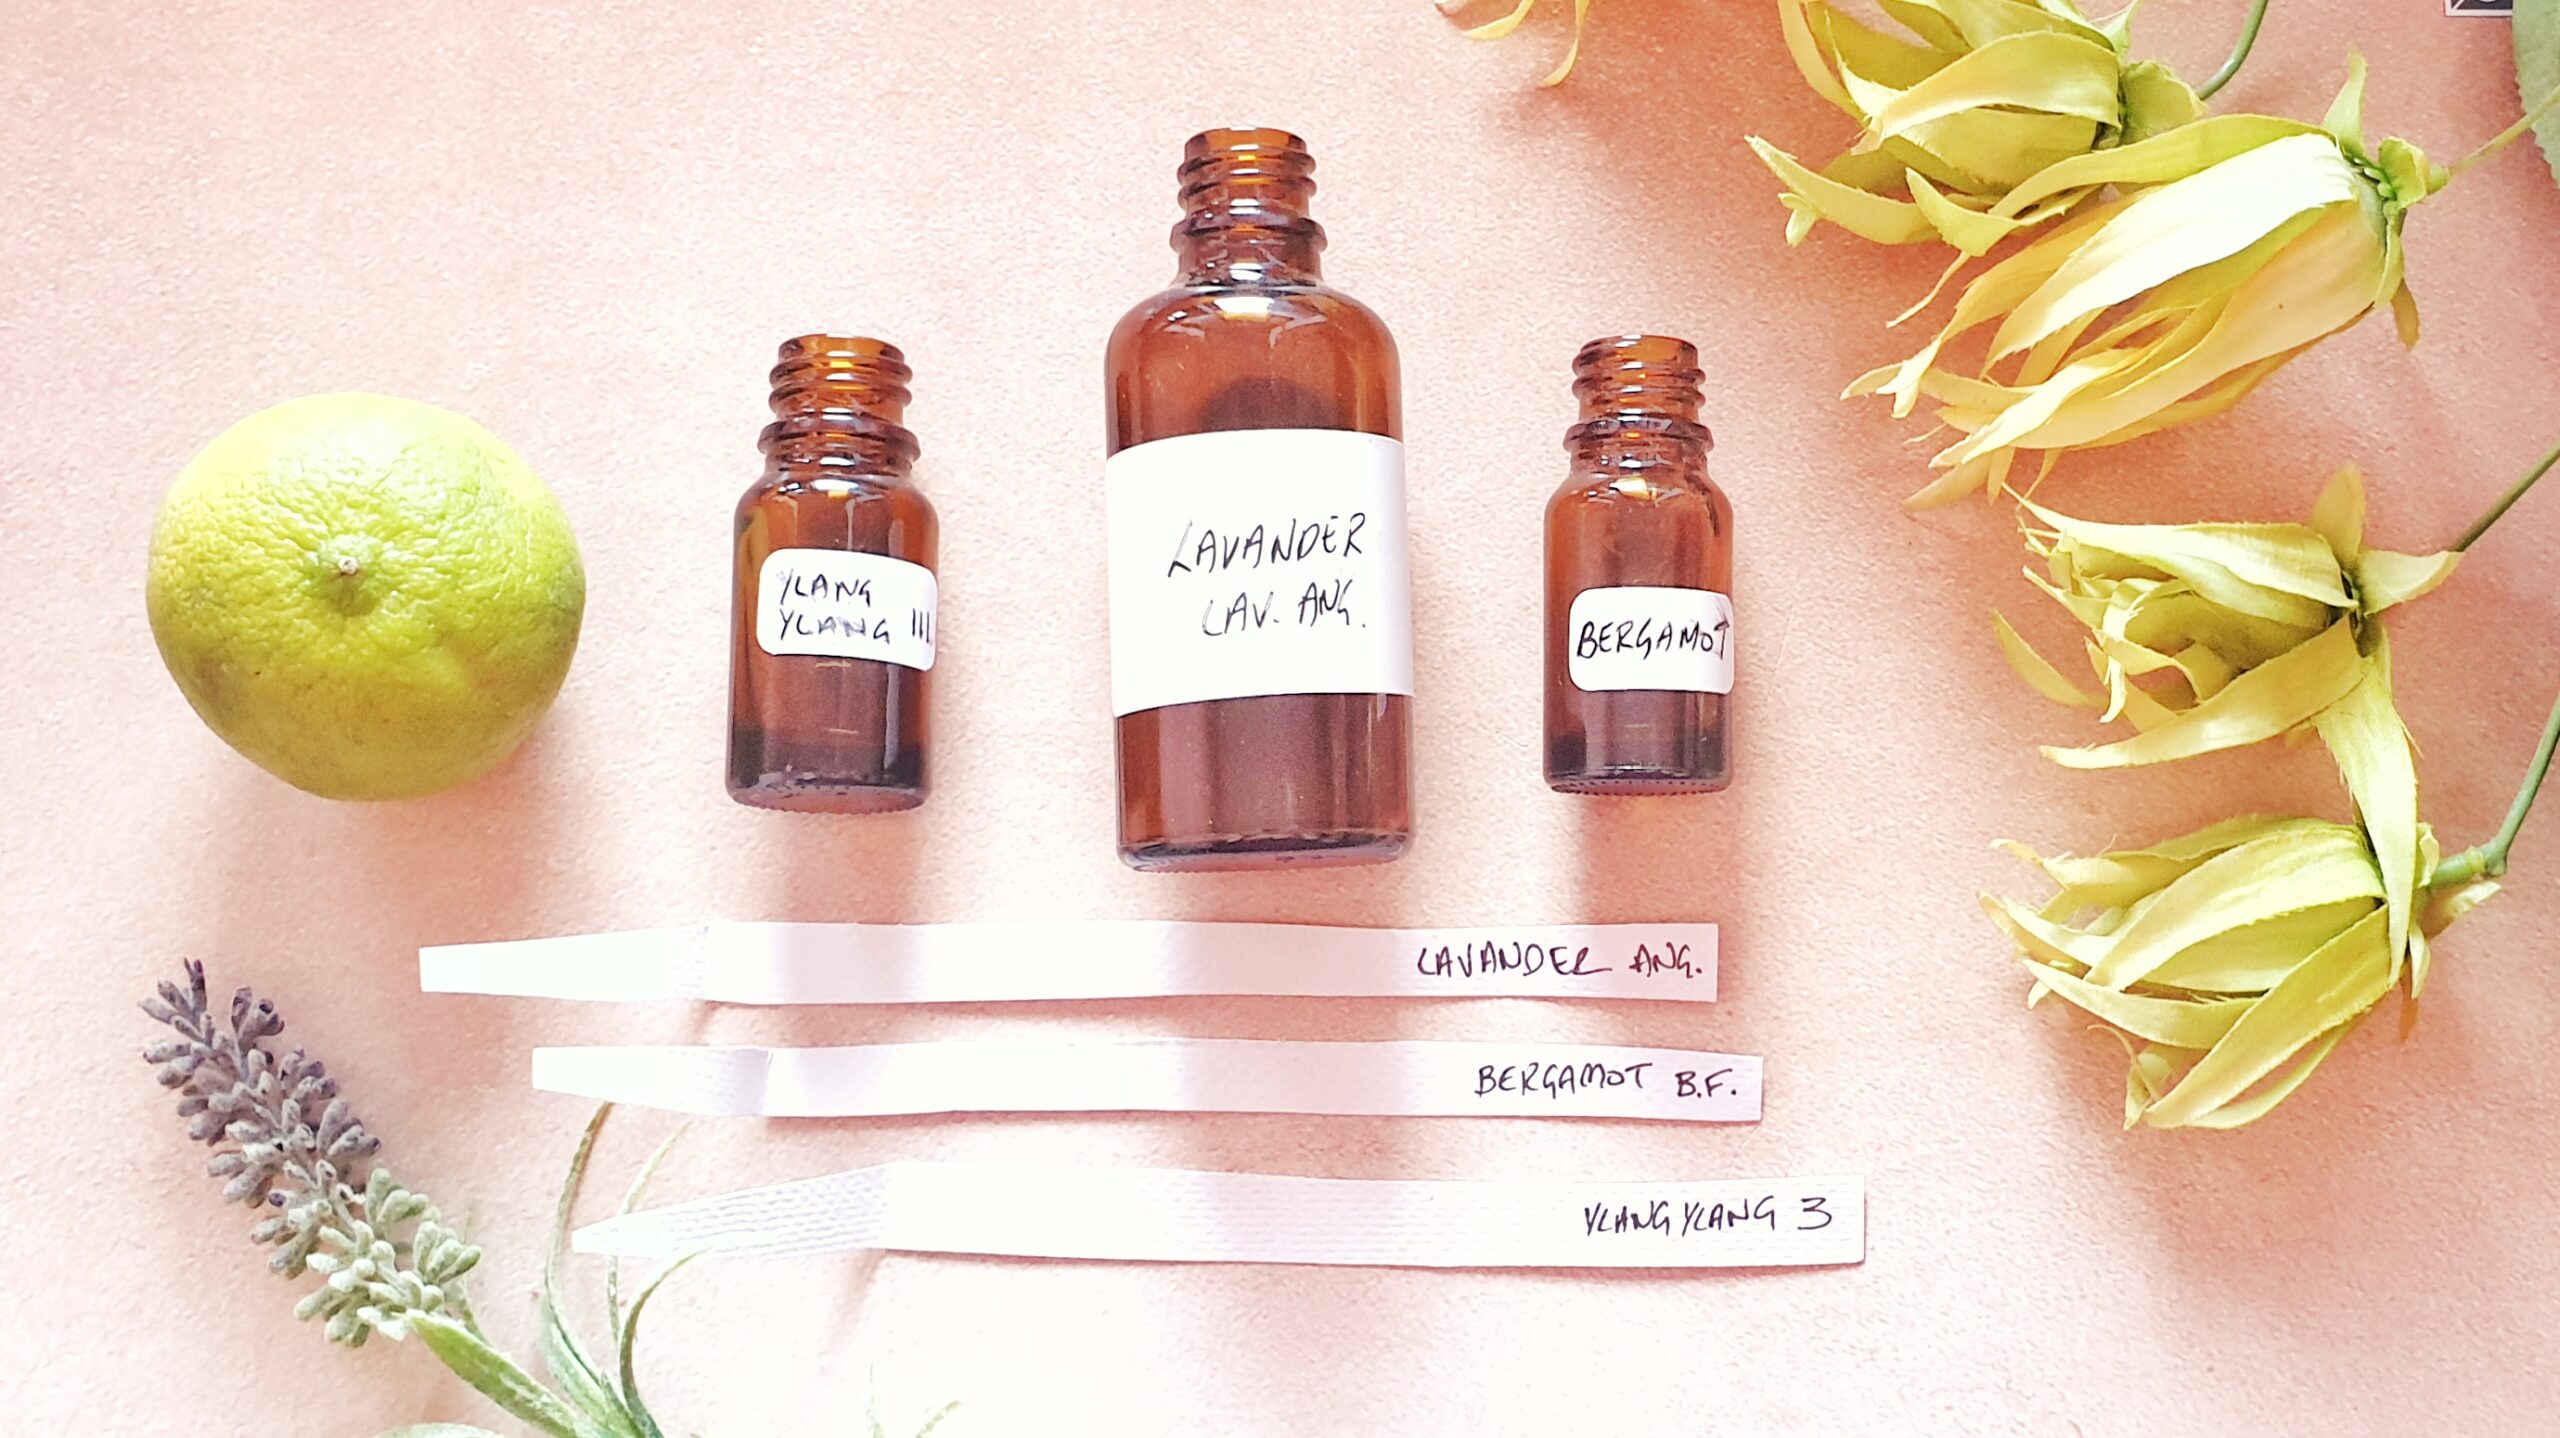 The fragrance creation process